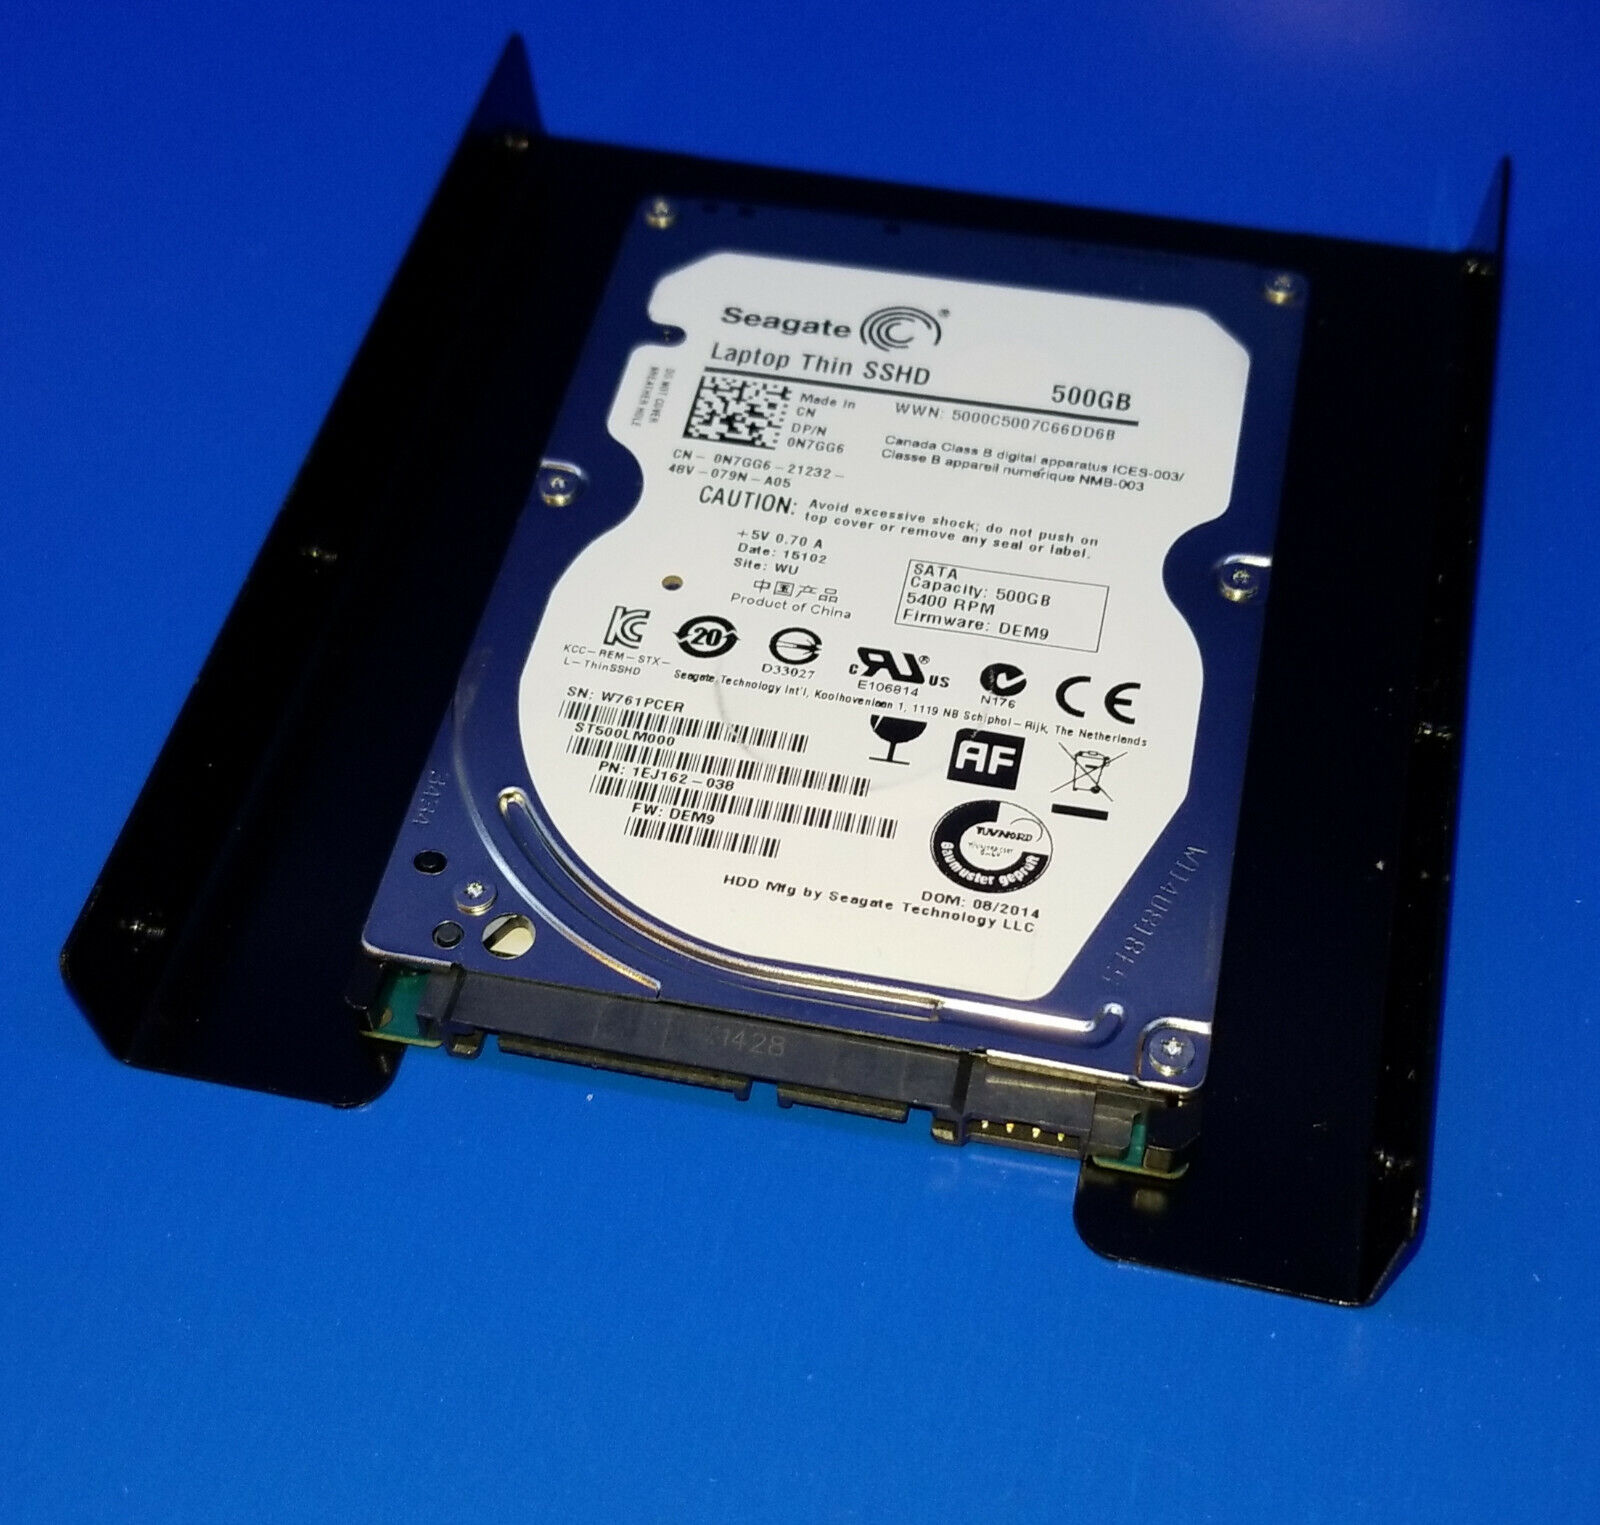 HP Pro 3125 - 500GB SSD Hybrid (SSHD) with Windows 10 Home 64 Loaded